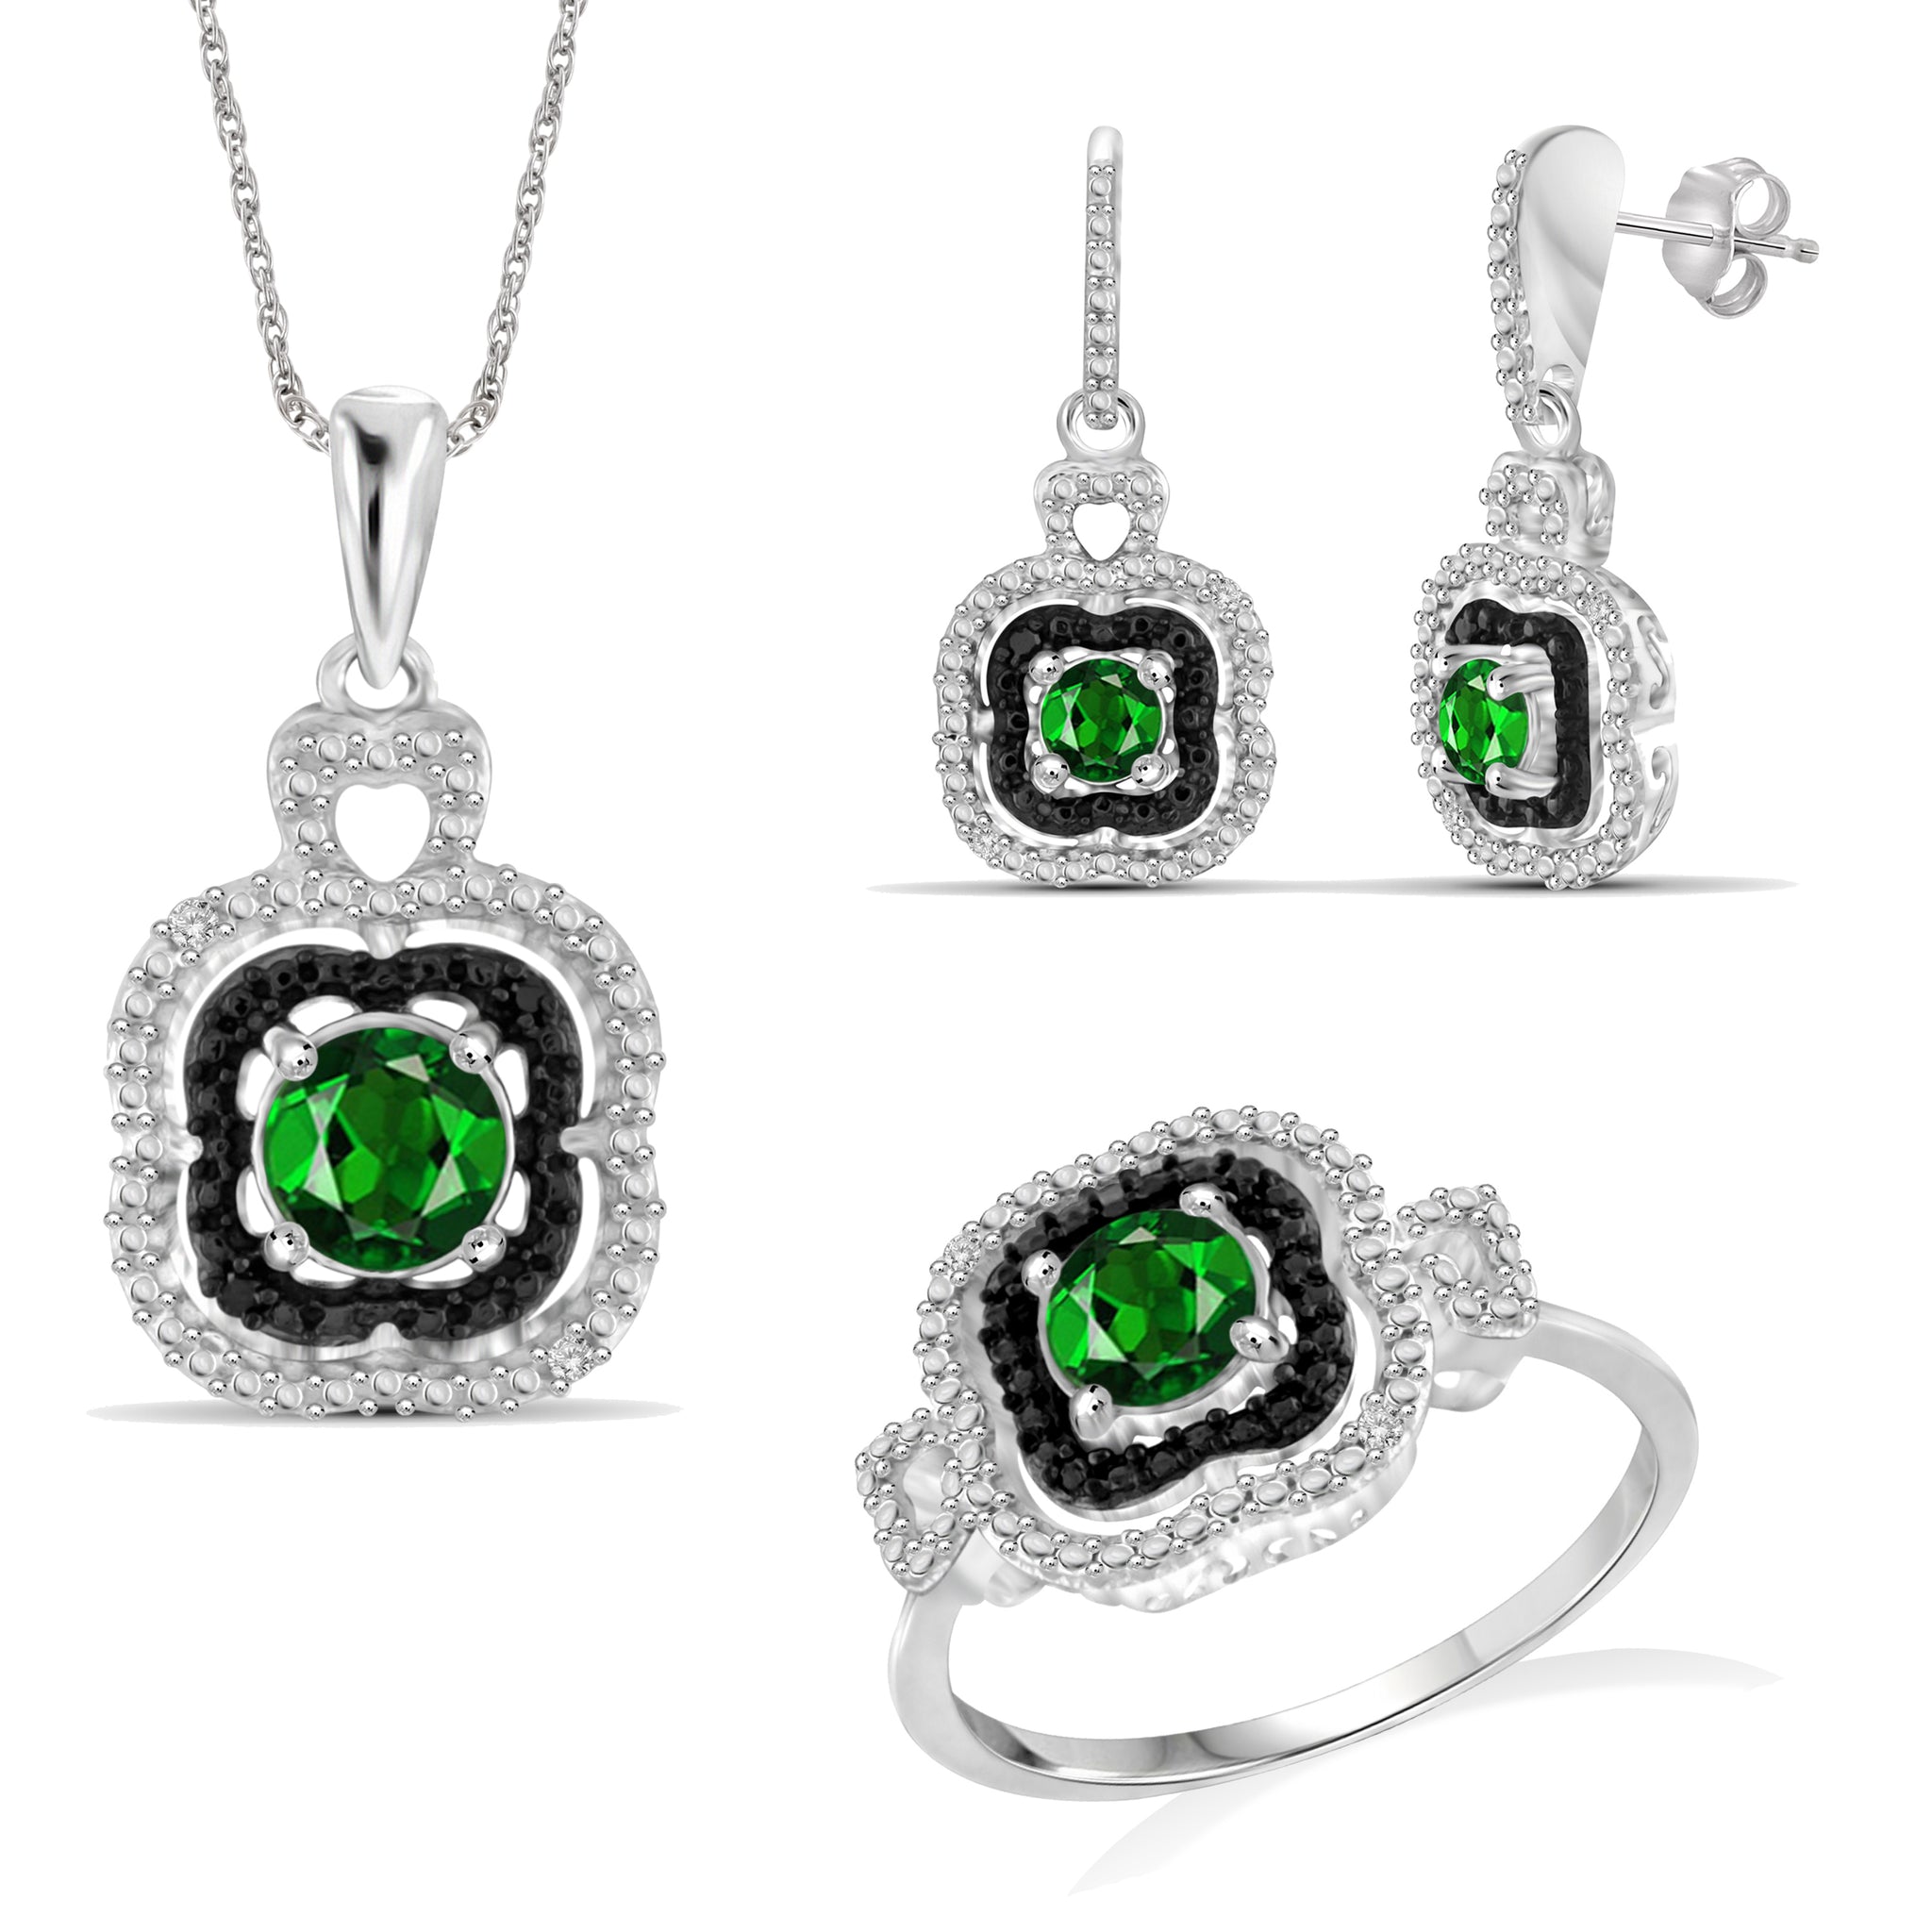 JewelonFire 1.50 Carat T.G.W. Chrome Diopside And 1/20 Carat T.W. White Diamond Sterling Silver Cluster 3 Piece Jewelry Set - Assorted Colors